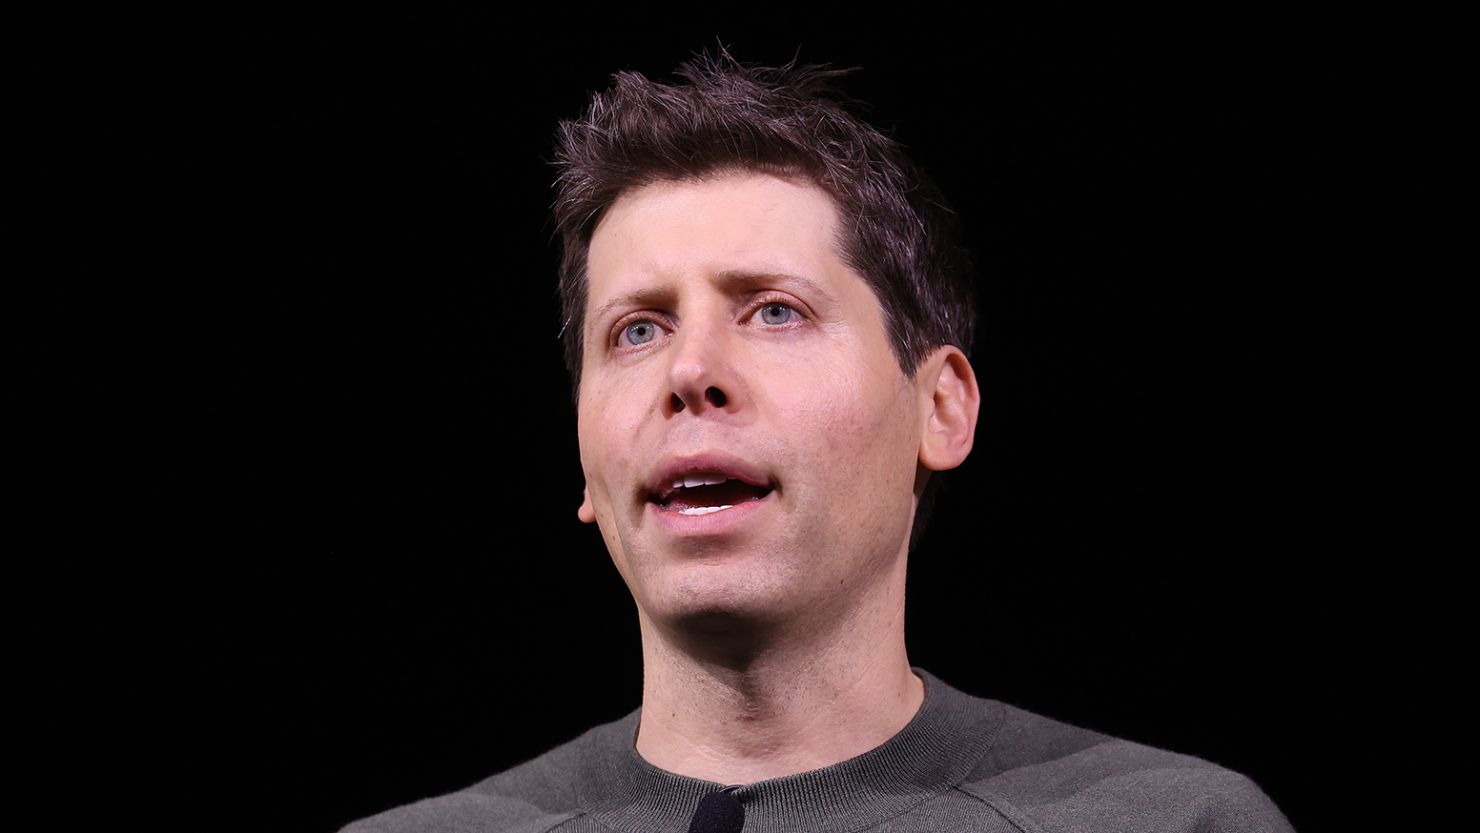 OpenAI CEO Sam Altman speaks during the OpenAI DevDay event on November 06, 2023 in San Francisco, California. Altman delivered the keynote address at the first-ever Open AI DevDay conference.